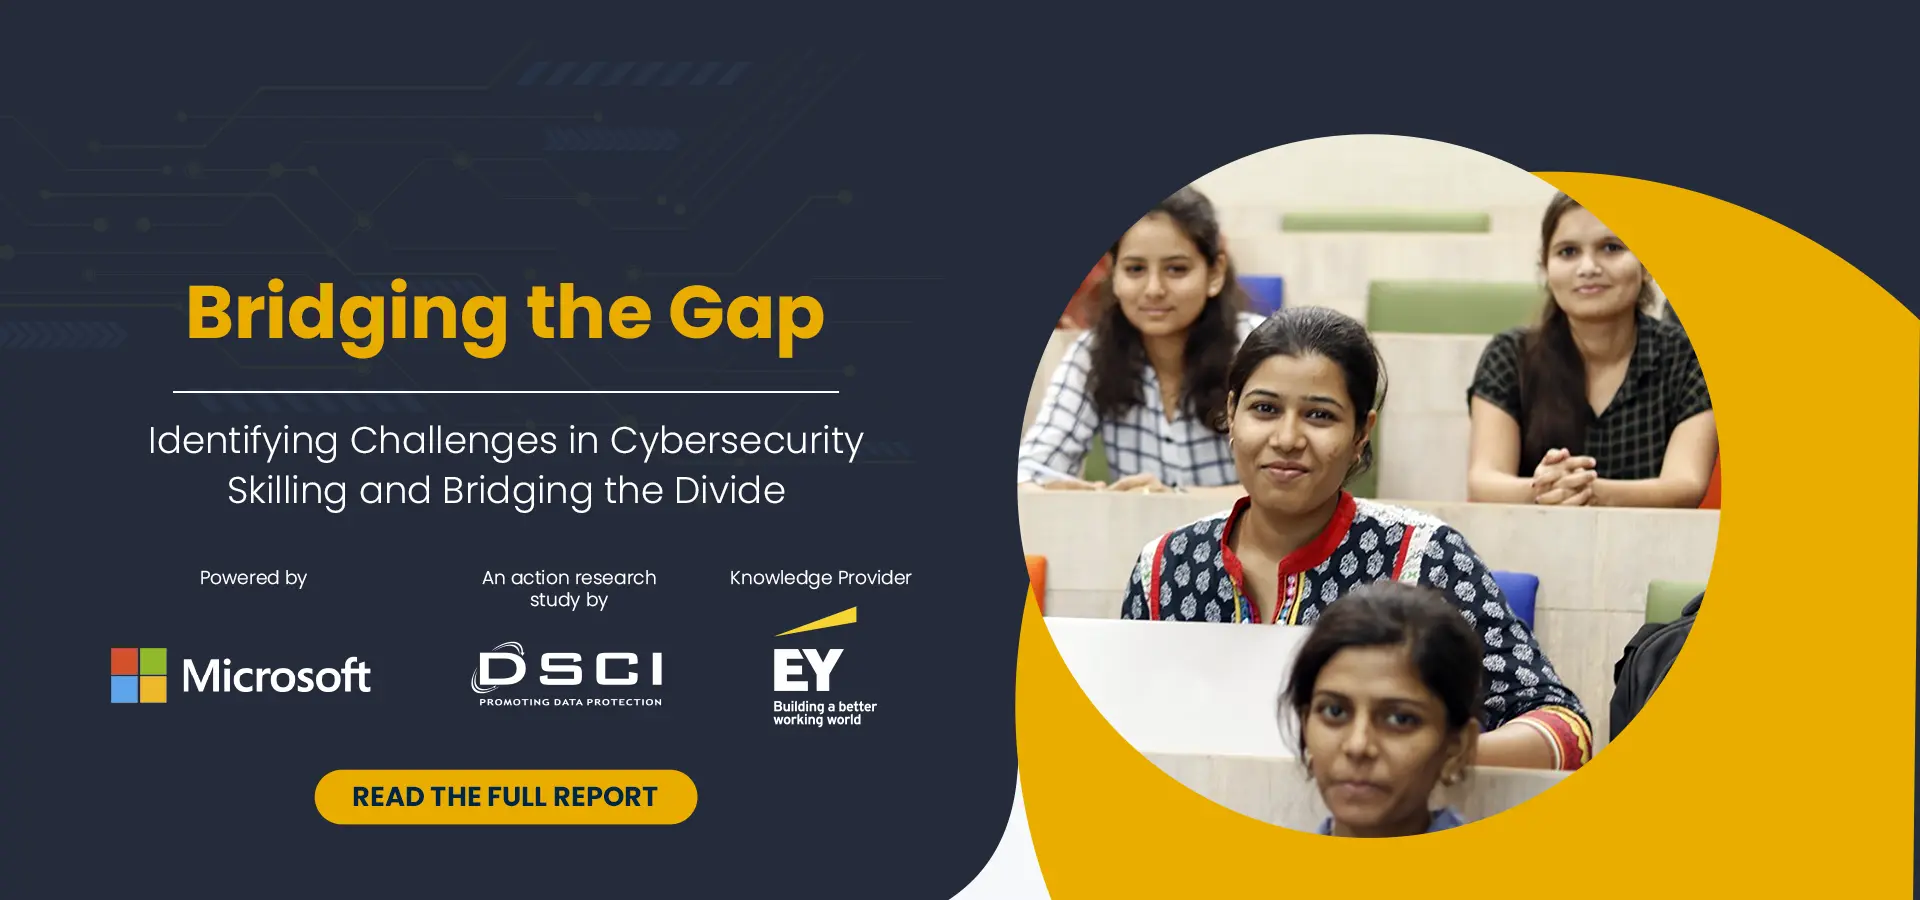 Click here to read the full report by Microsoft, DSCI and EY